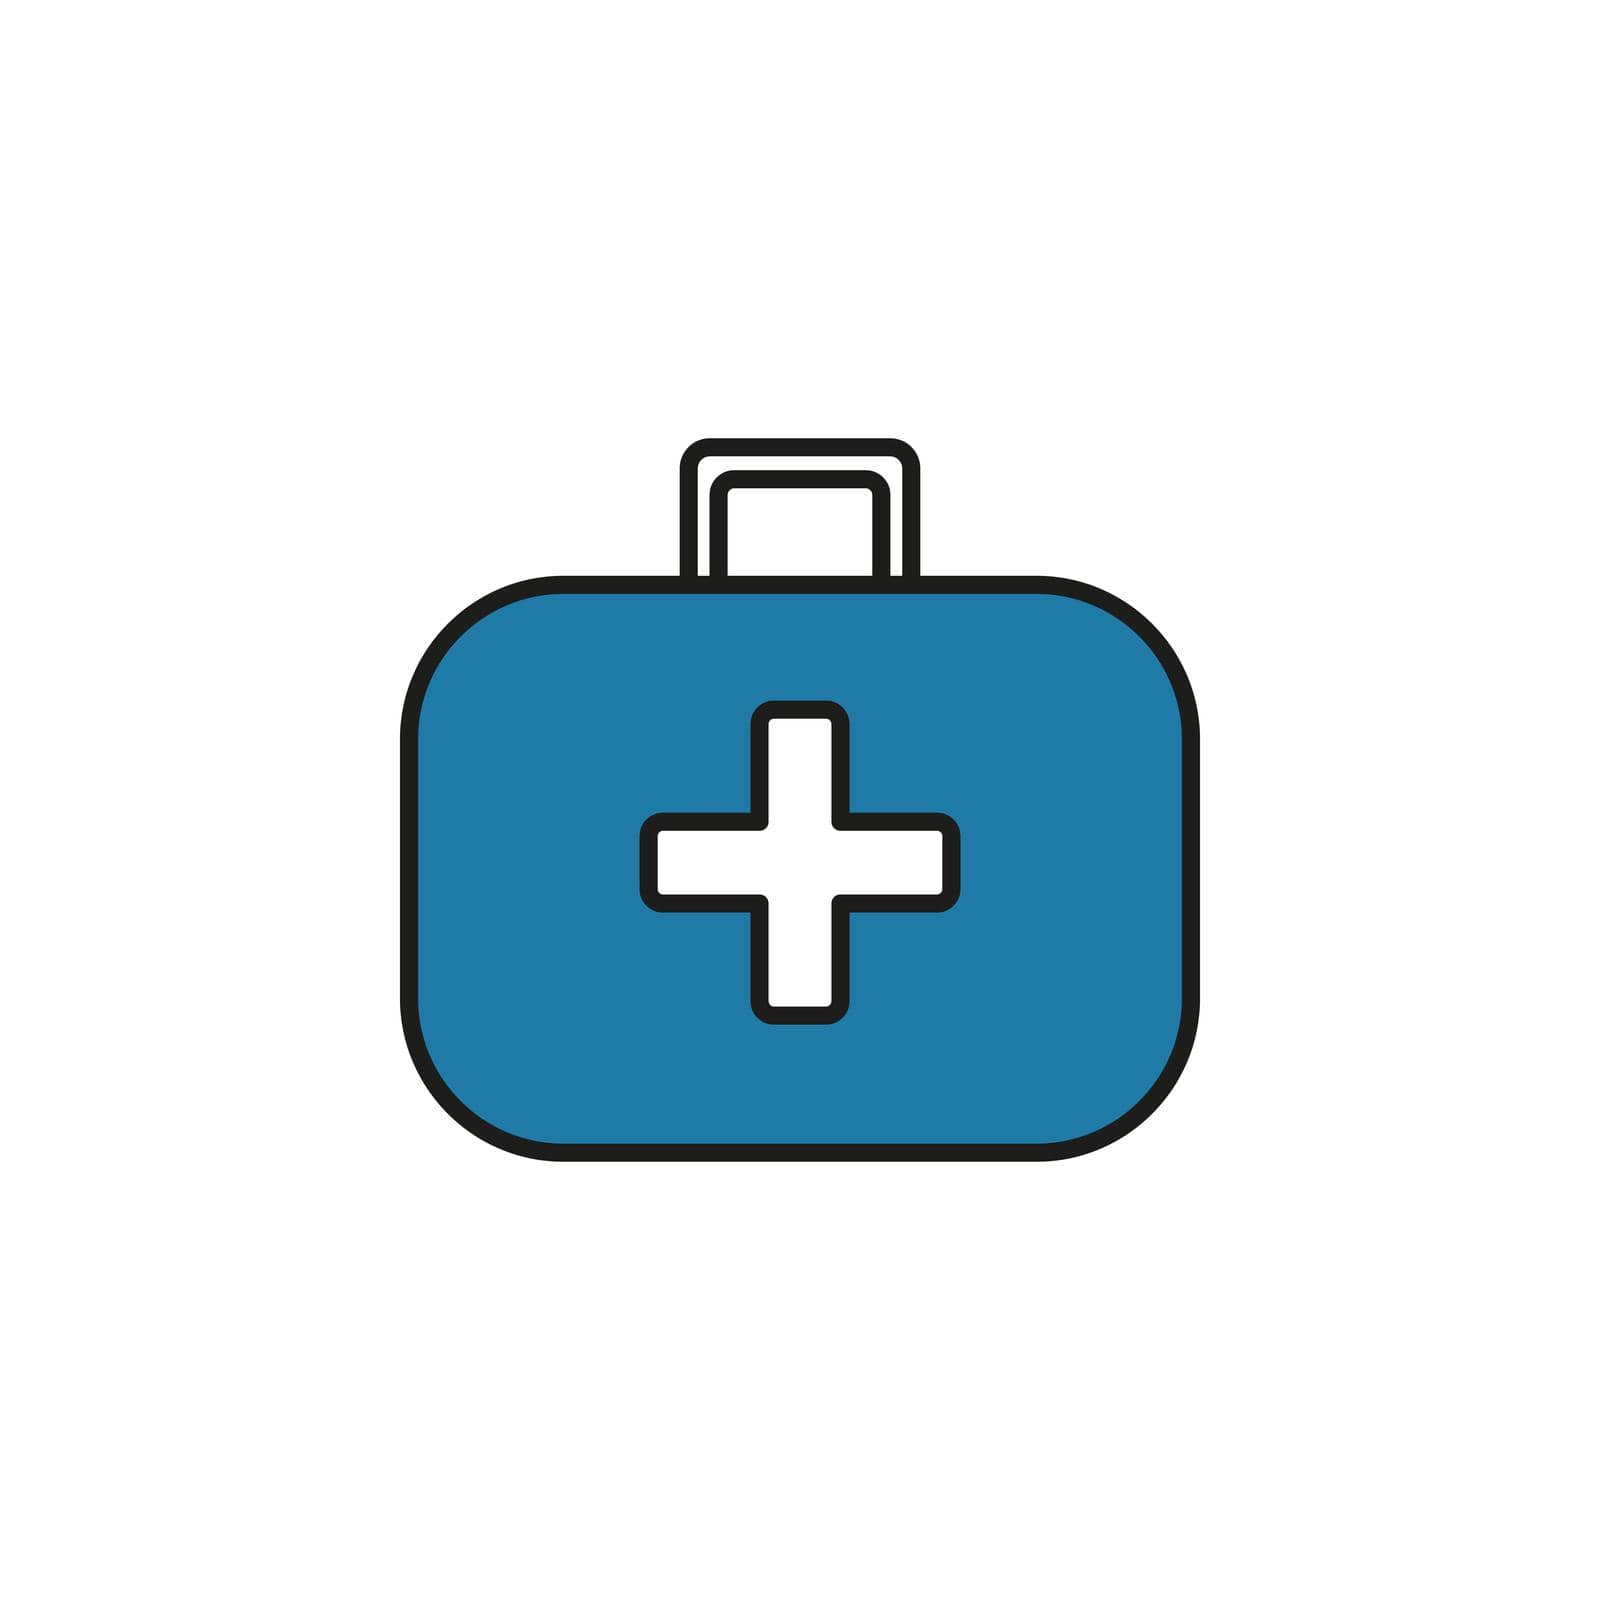 Paramedic medical suitcase line icon vector illustration by TassiaK